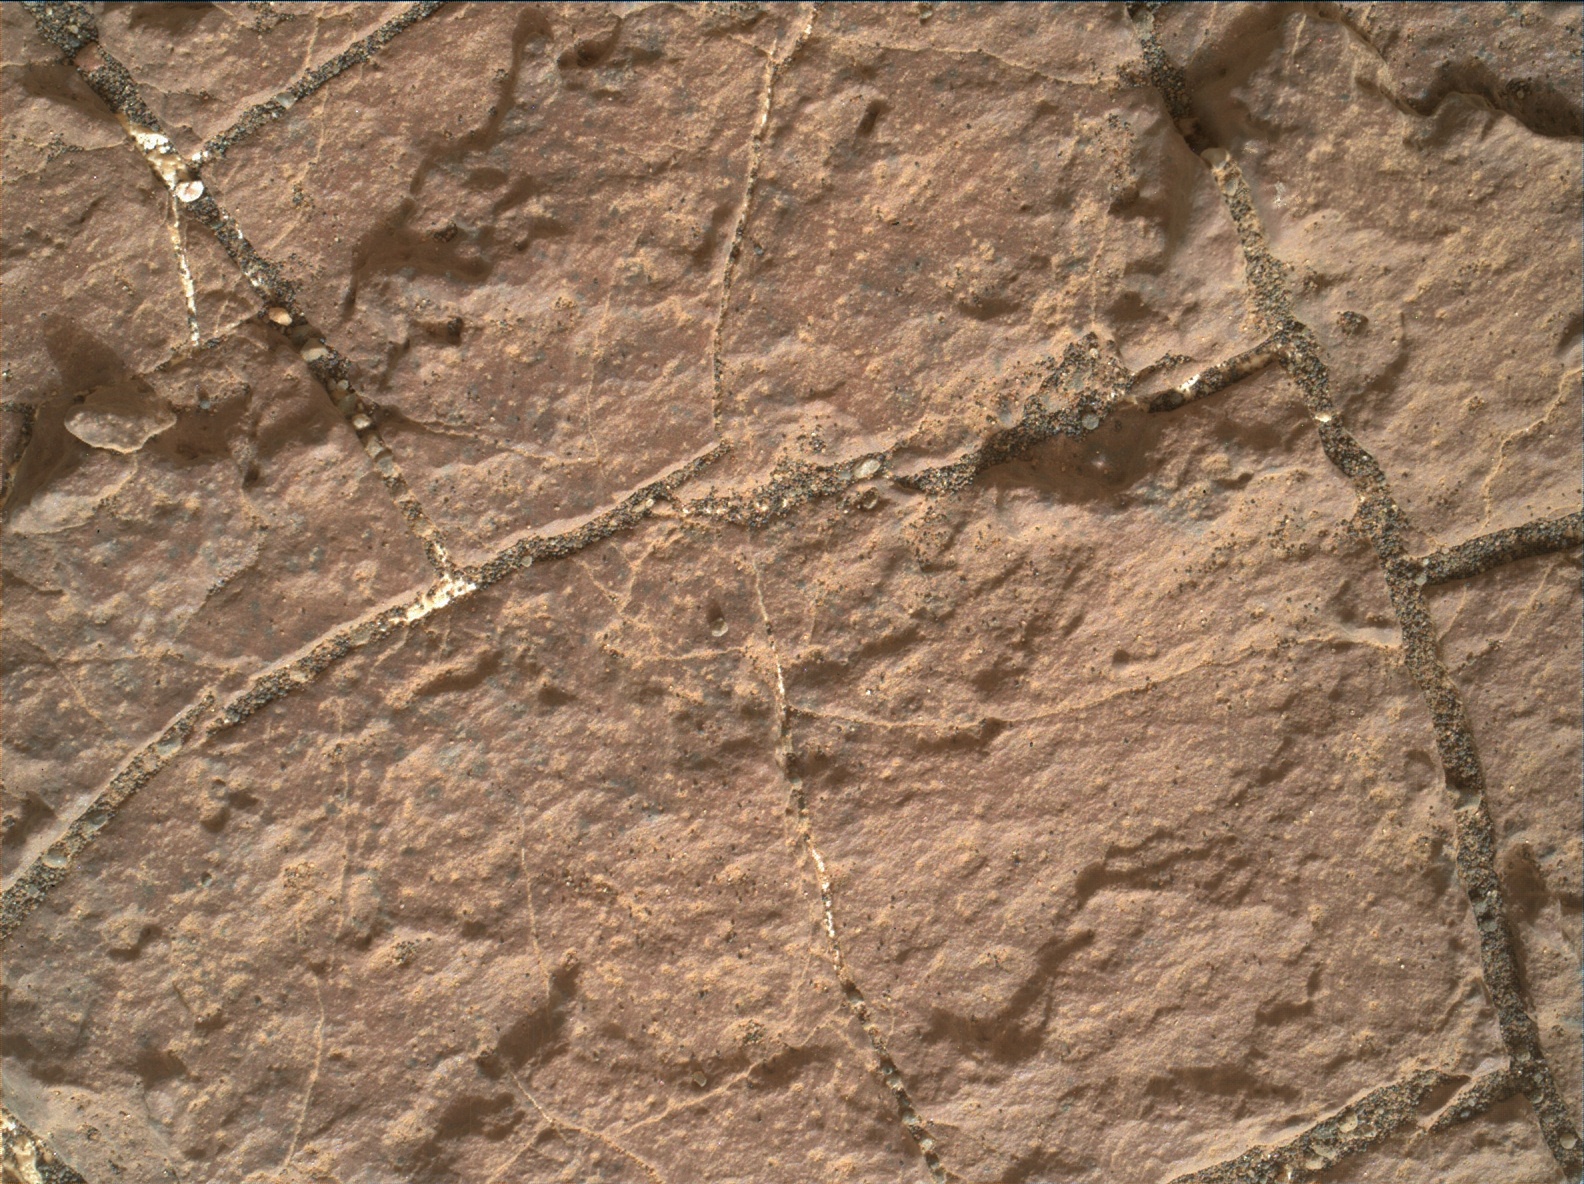 Nasa's Mars rover Curiosity acquired this image using its Mars Hand Lens Imager (MAHLI) on Sol 1477